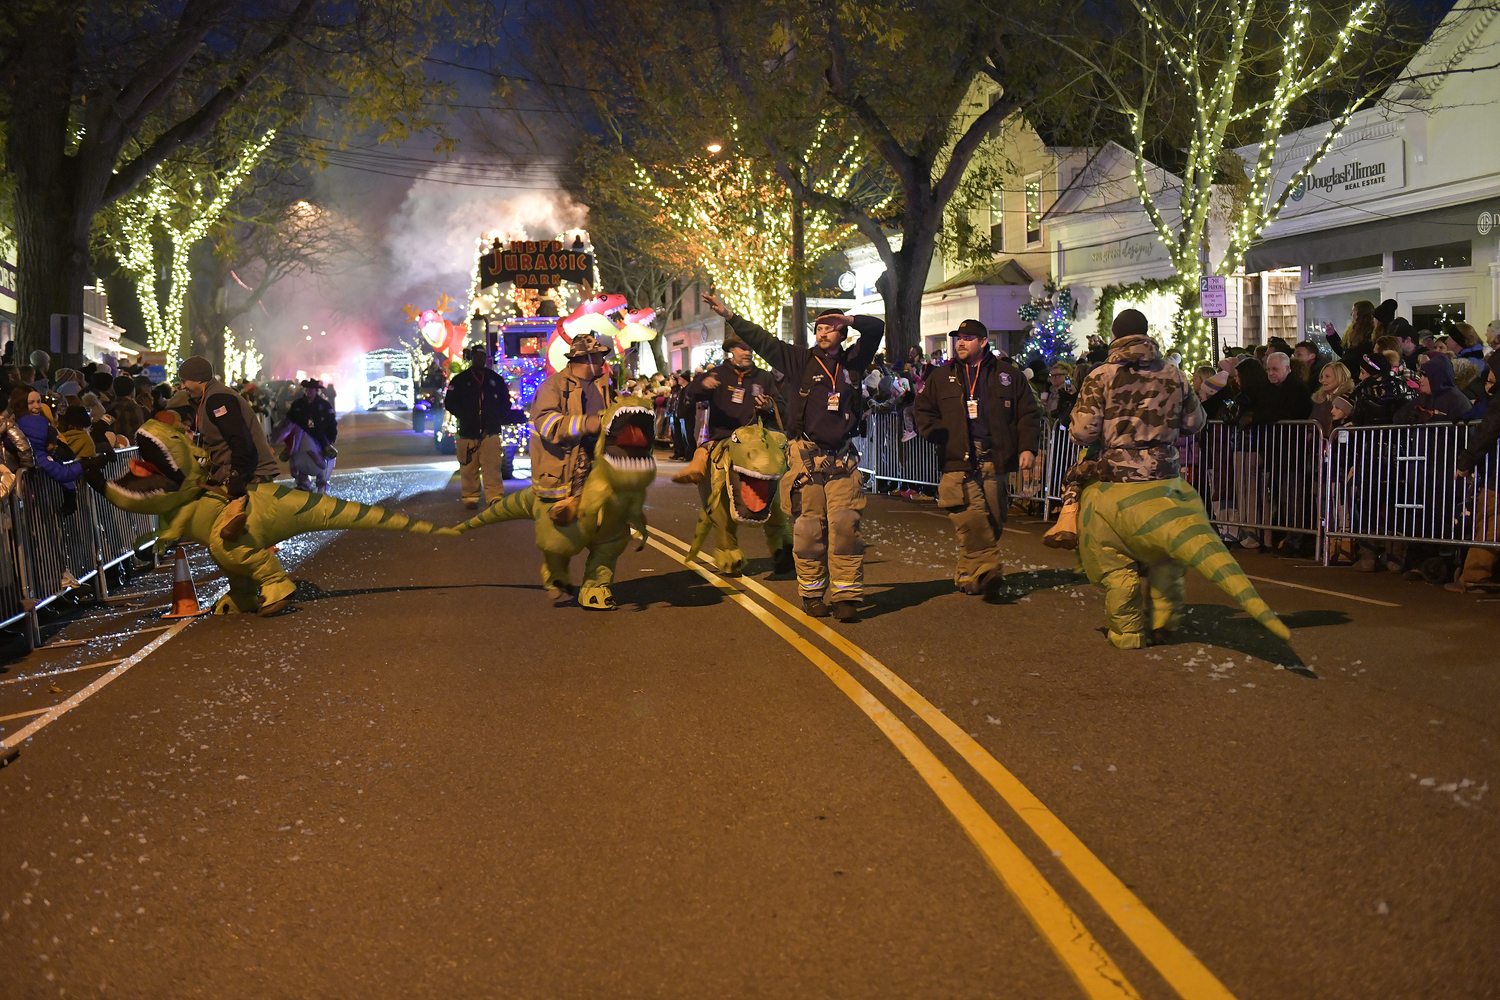 The Hampton Bays Fire Department took the crowd on a trip to Jurassic Park.